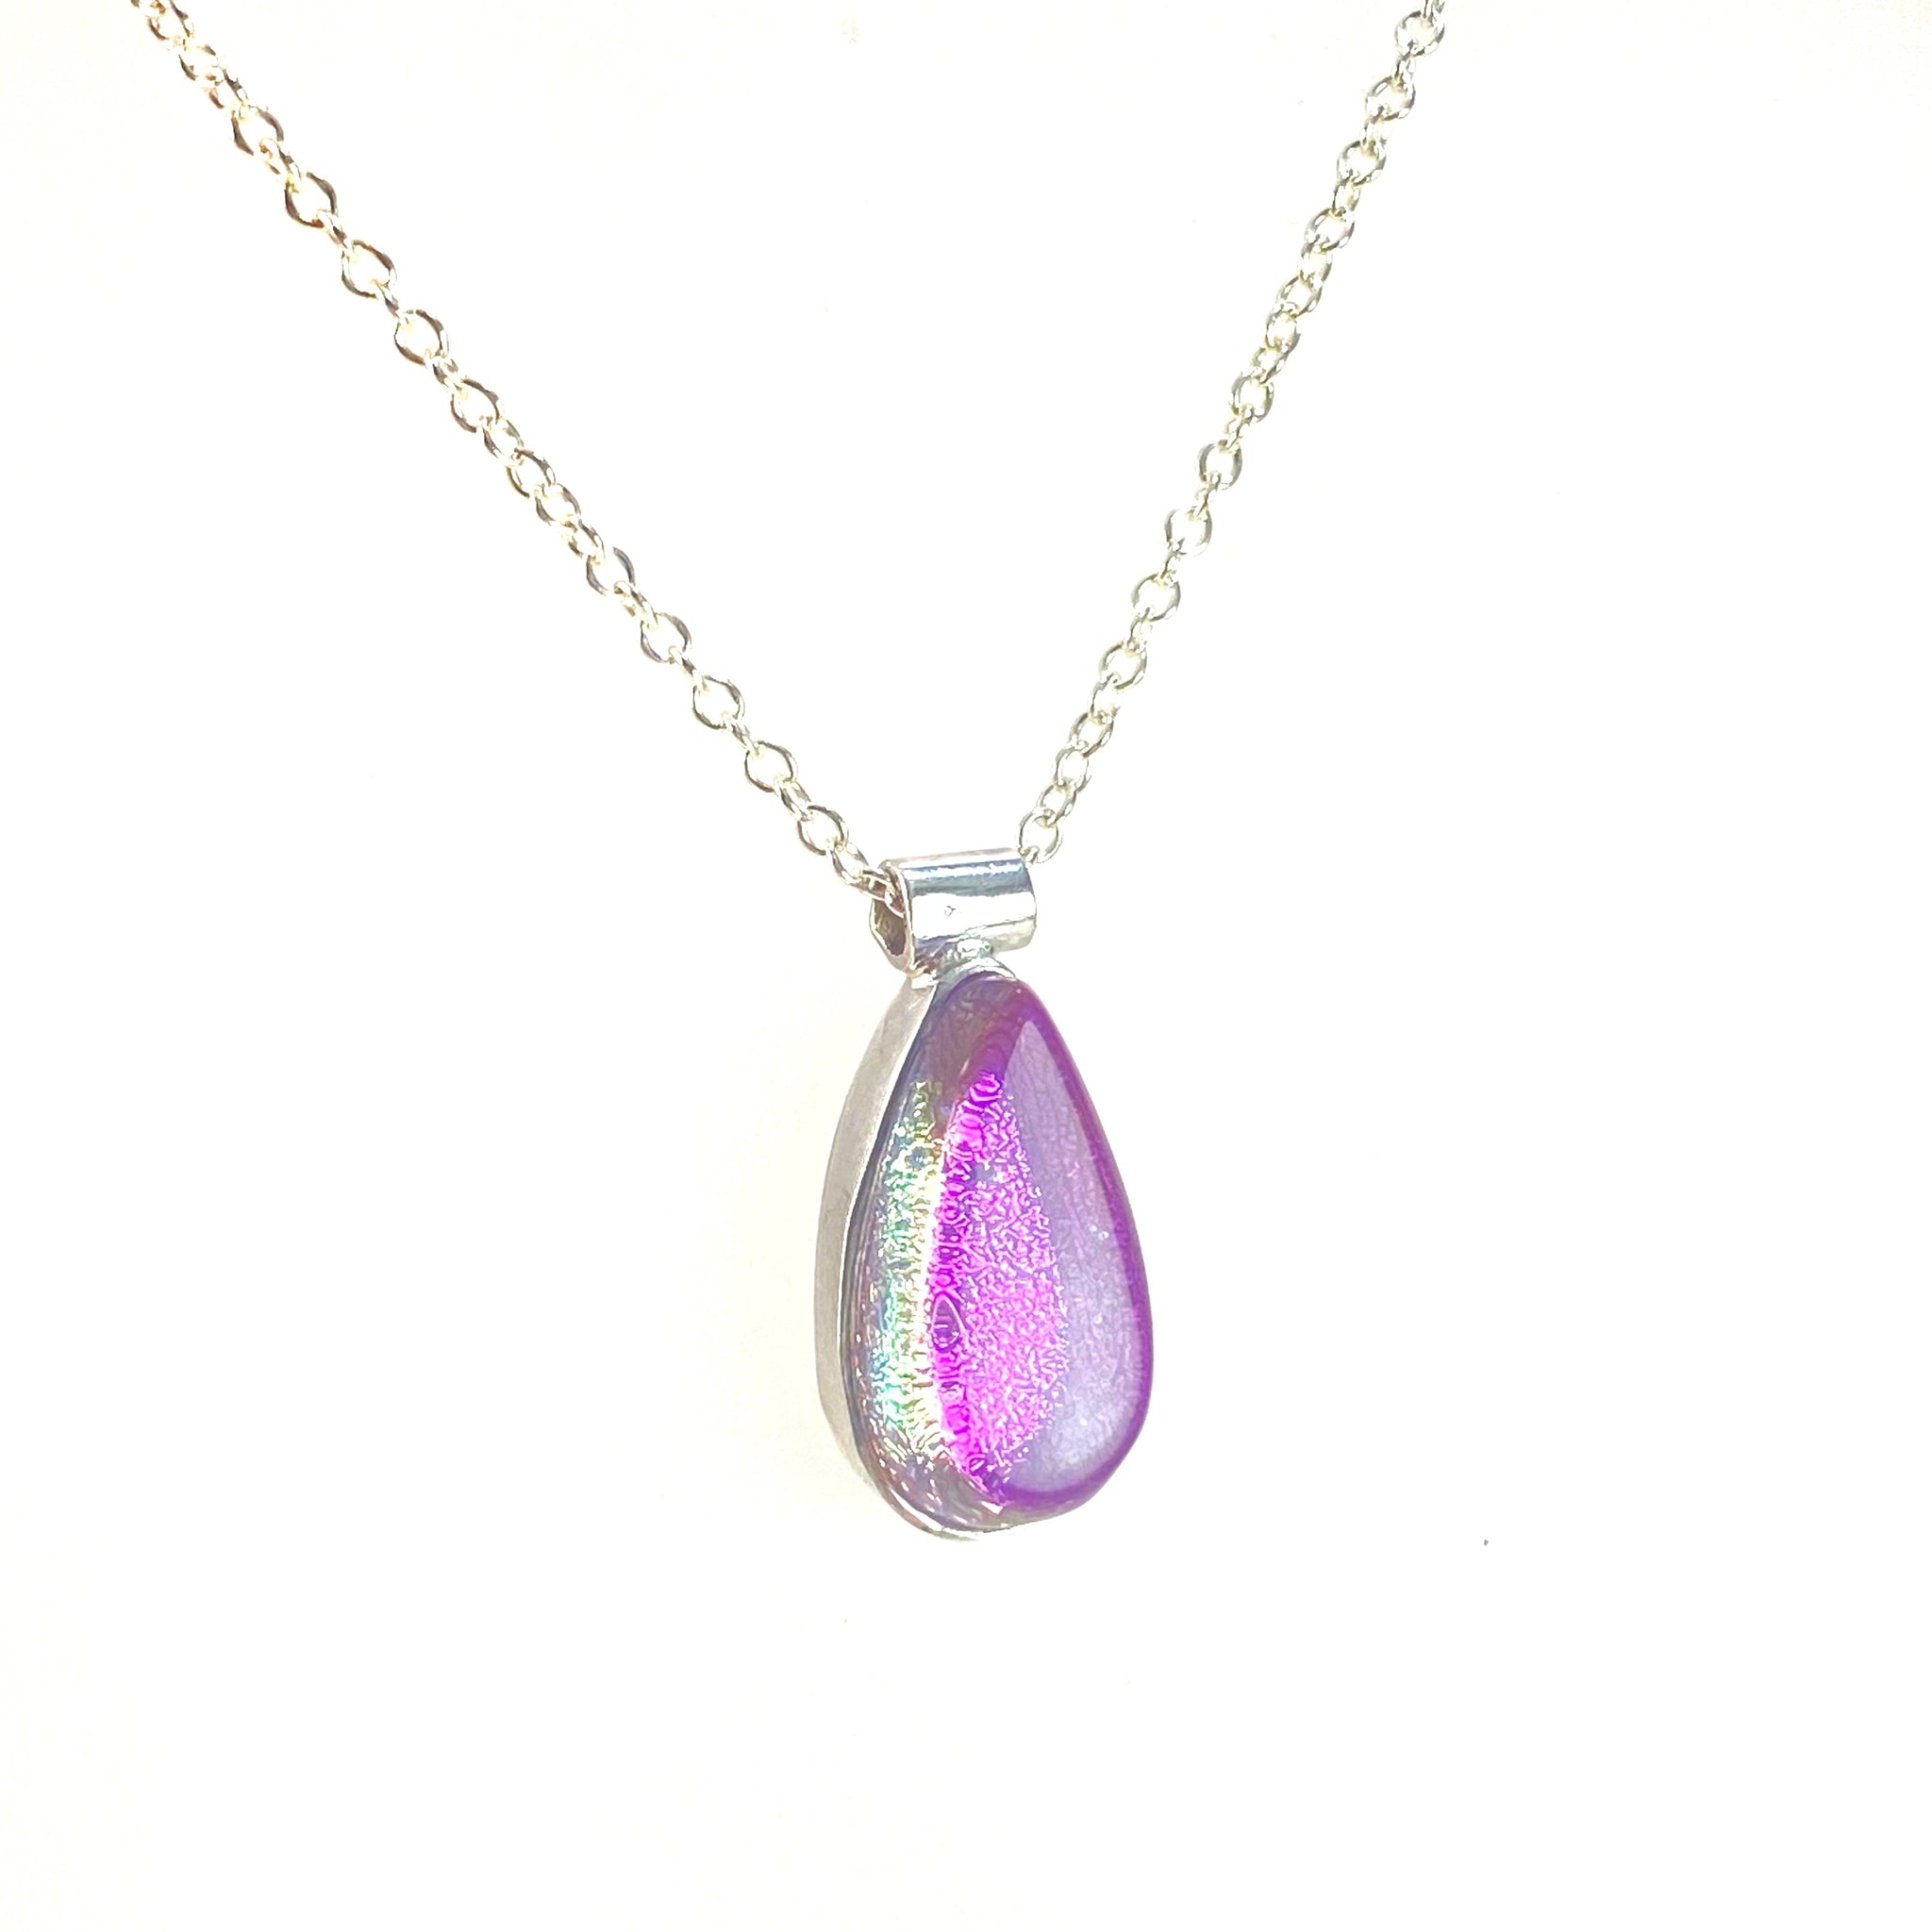 Teardrop Necklace in Cotton Candy